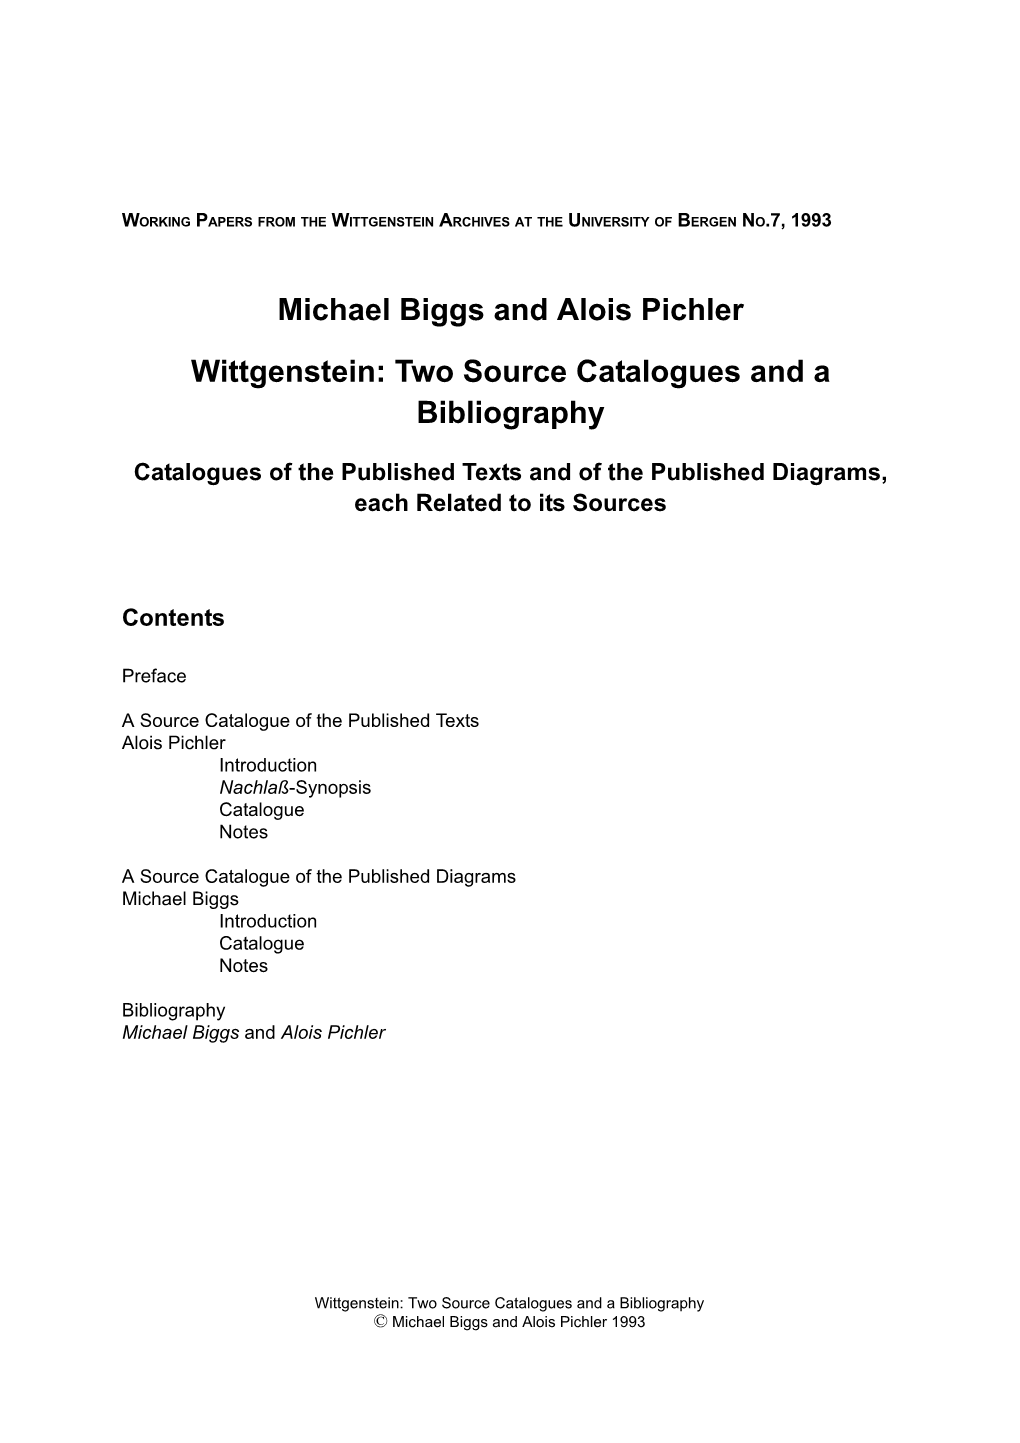 Michael Biggs and Alois Pichler Wittgenstein: Two Source Catalogues and a Bibliography